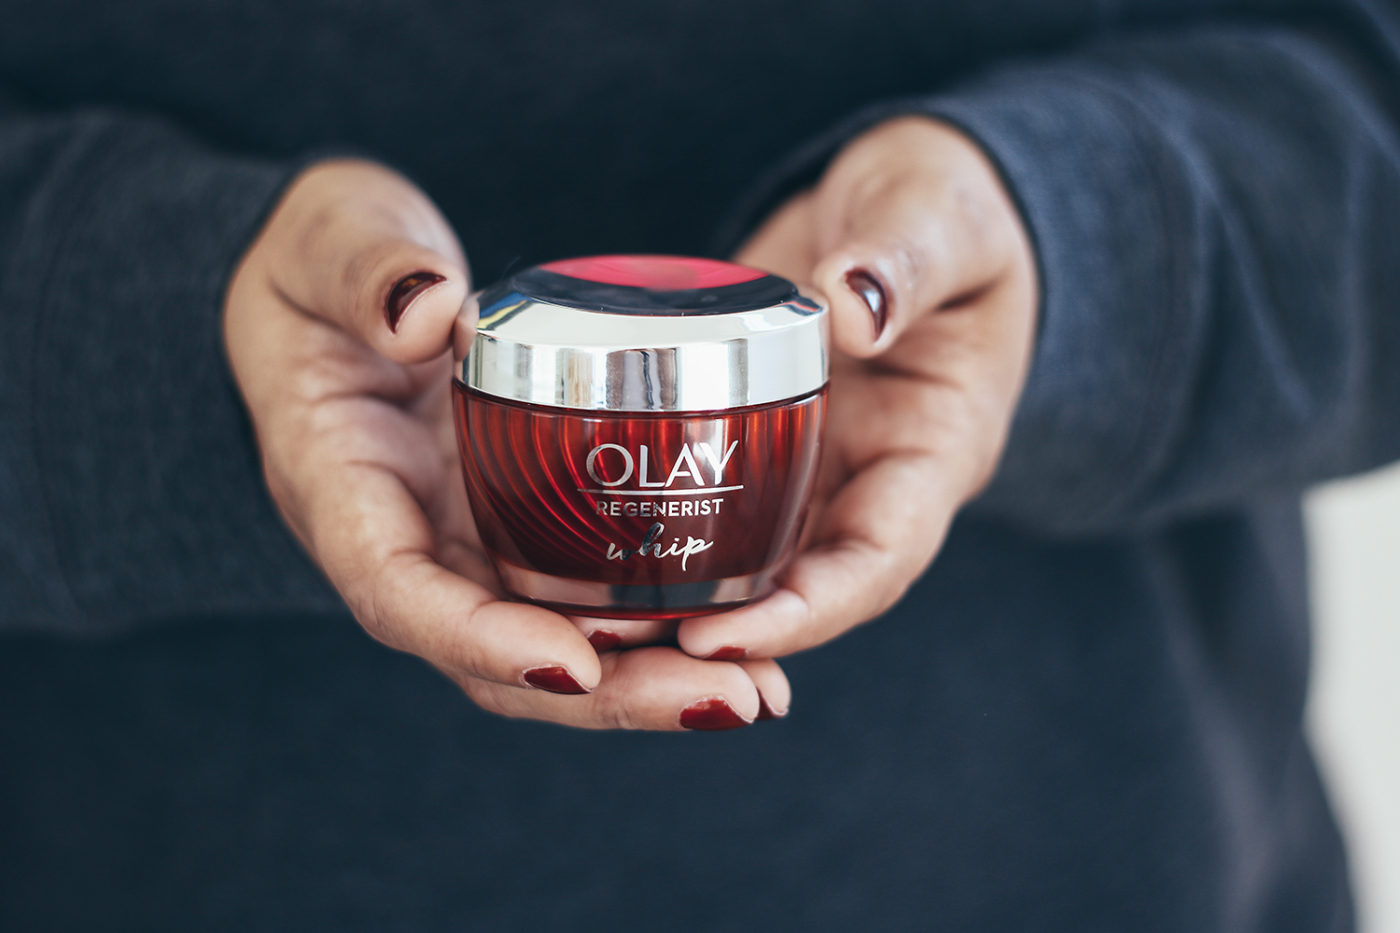 Looking for the perfect moisturizer this winter? See why you NEED to try the NEW Olay Regenerist Whip ASAP!